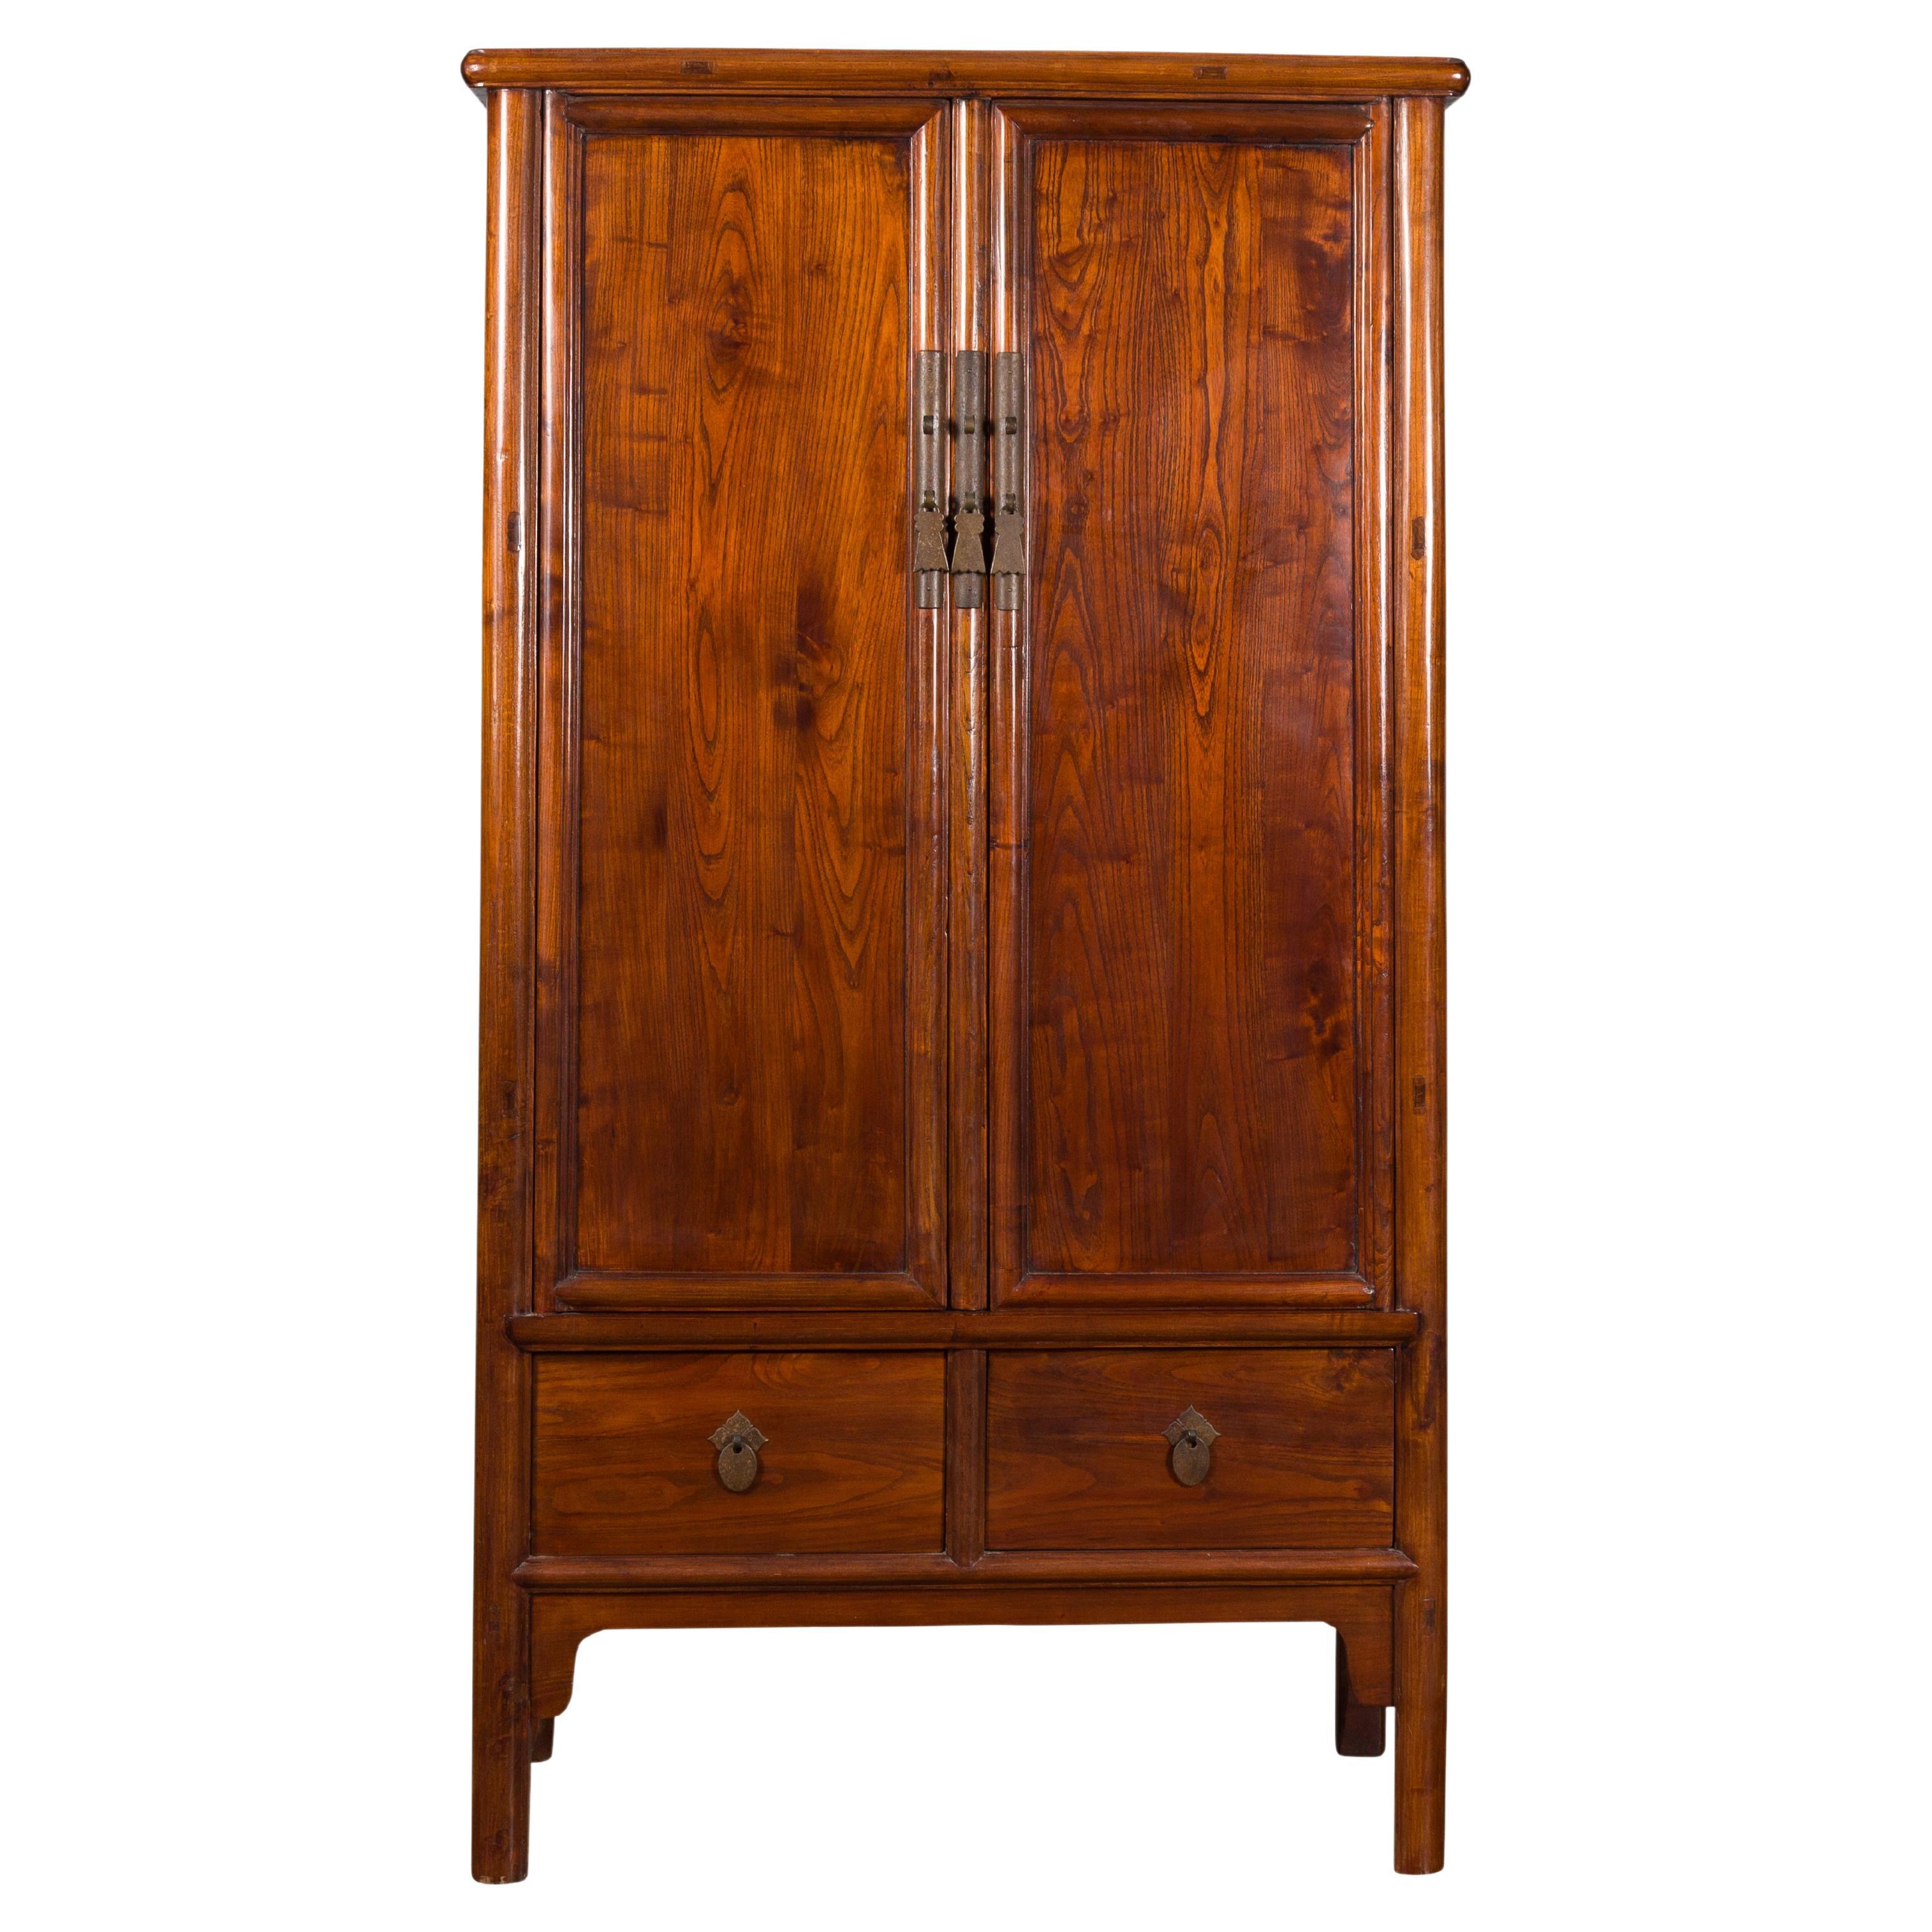 Chinese 19th Century Qing Dynasty Period Elmwood Cabinet with Doors and Drawers For Sale